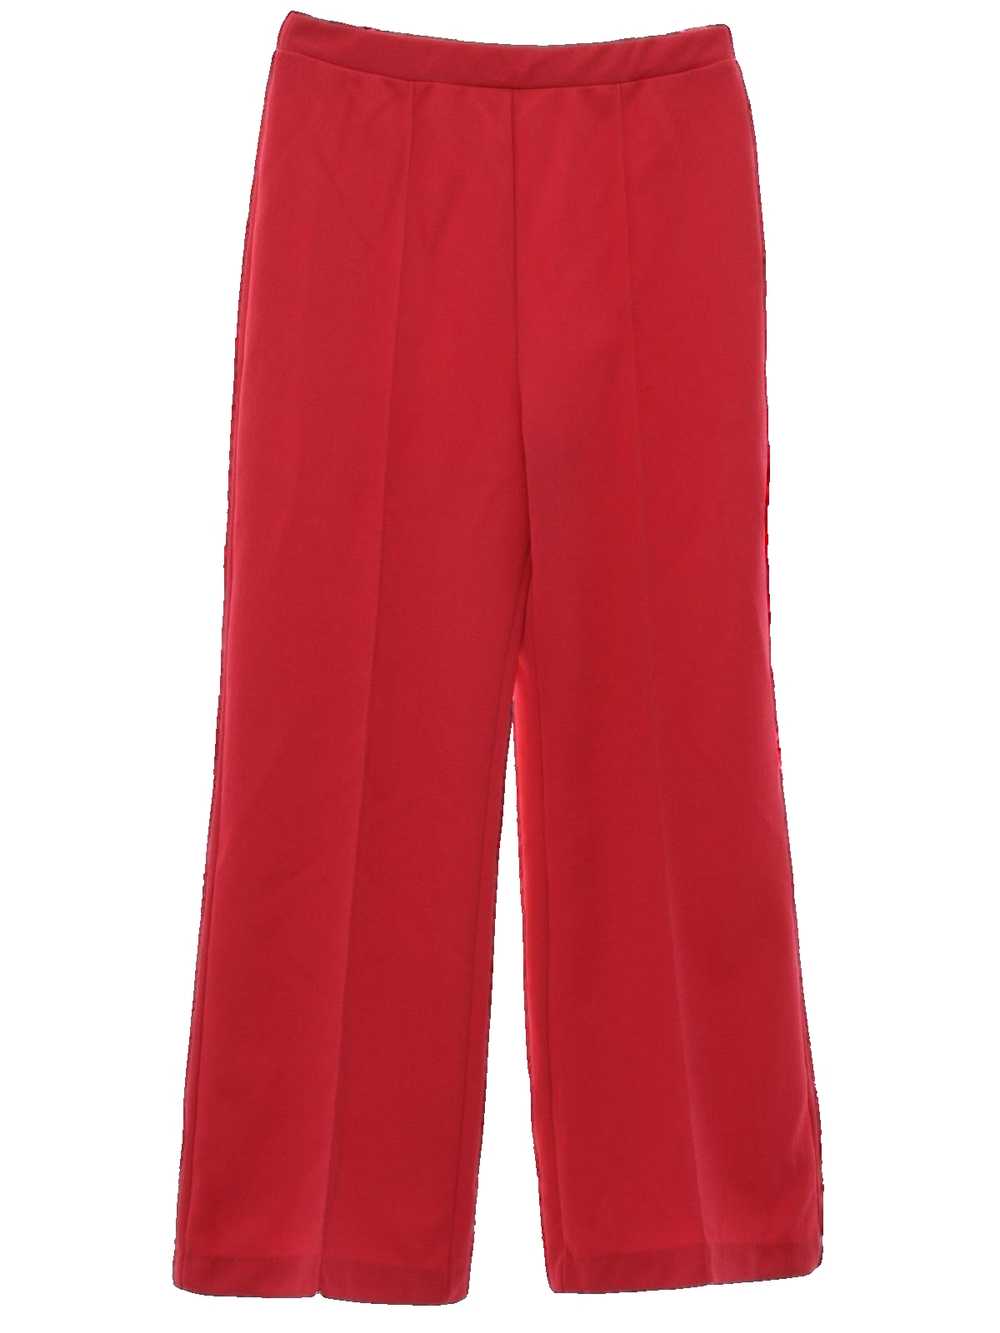 1970's Pykettes Womens Flared Knit Pants - image 1